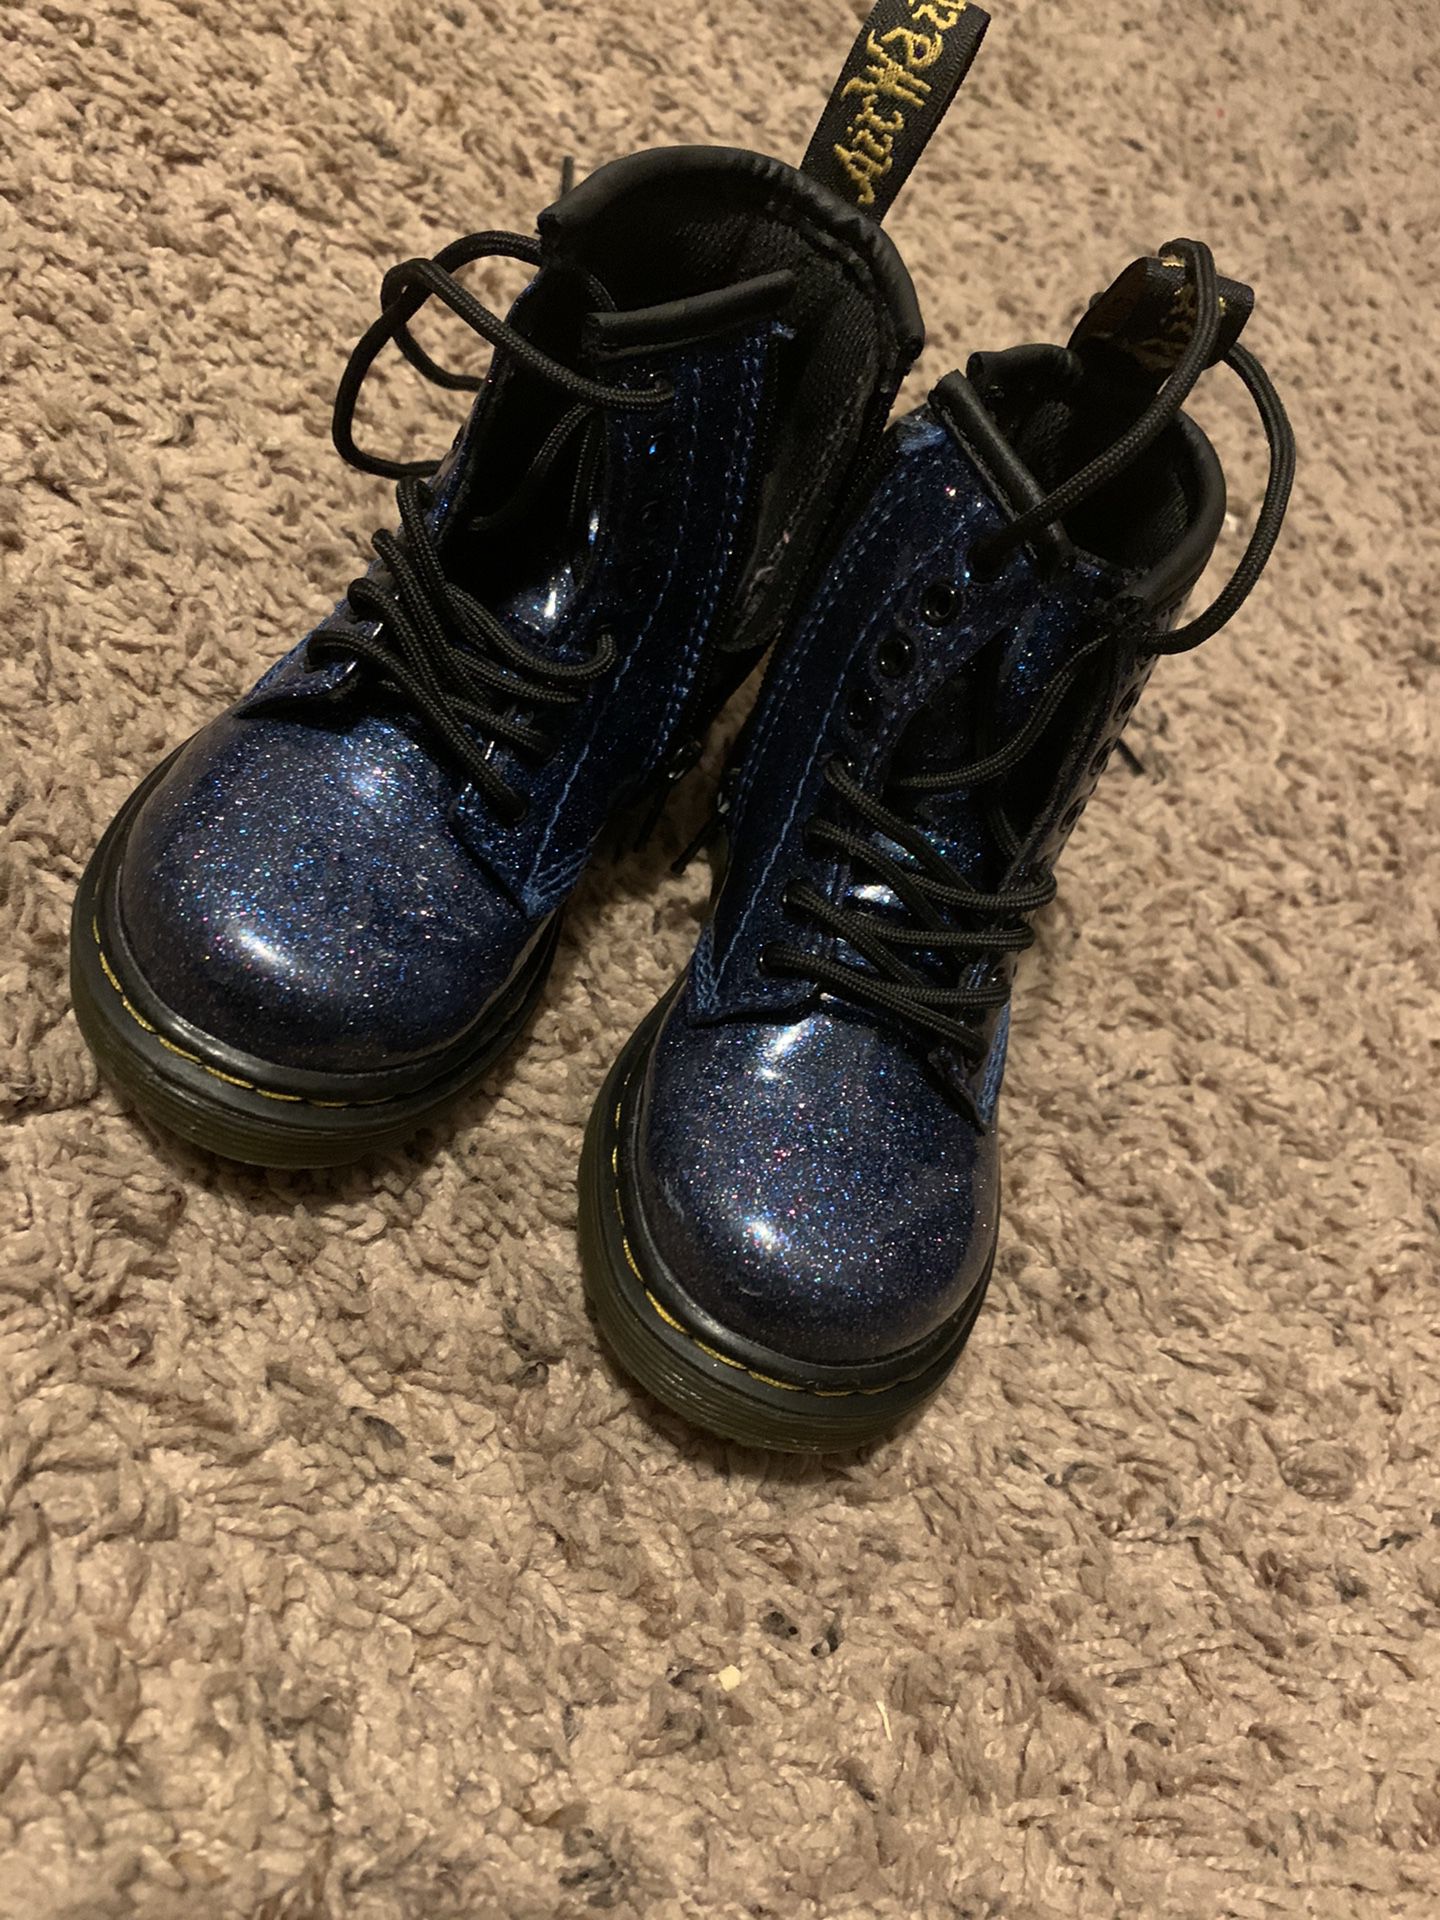 Girls Doc Martens boots Toddler Size 7